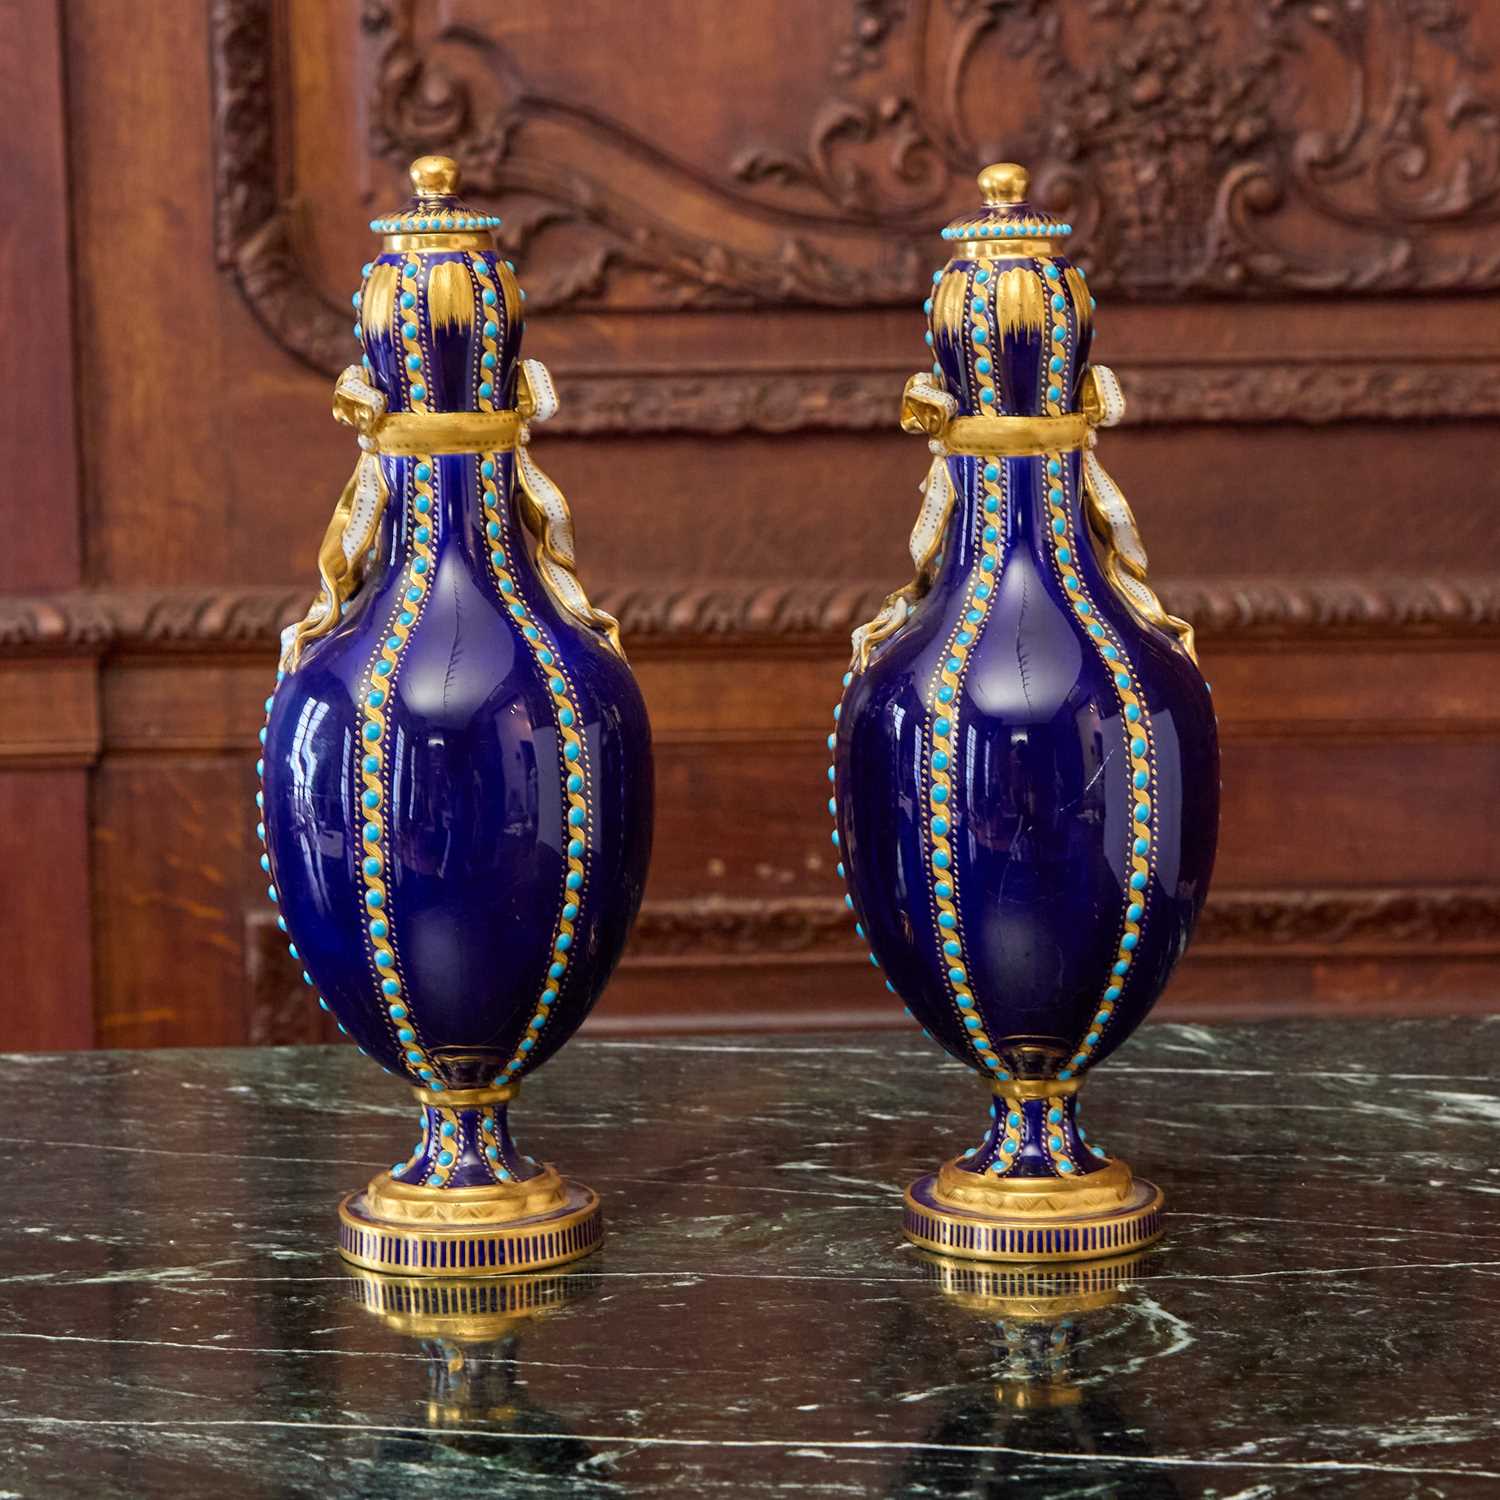 Lot 548 - PAIR OF SEVRES STYLE PORCELAIN ‘JEWELED’ COBALT-BLUE GROUND VASES AND COVERS